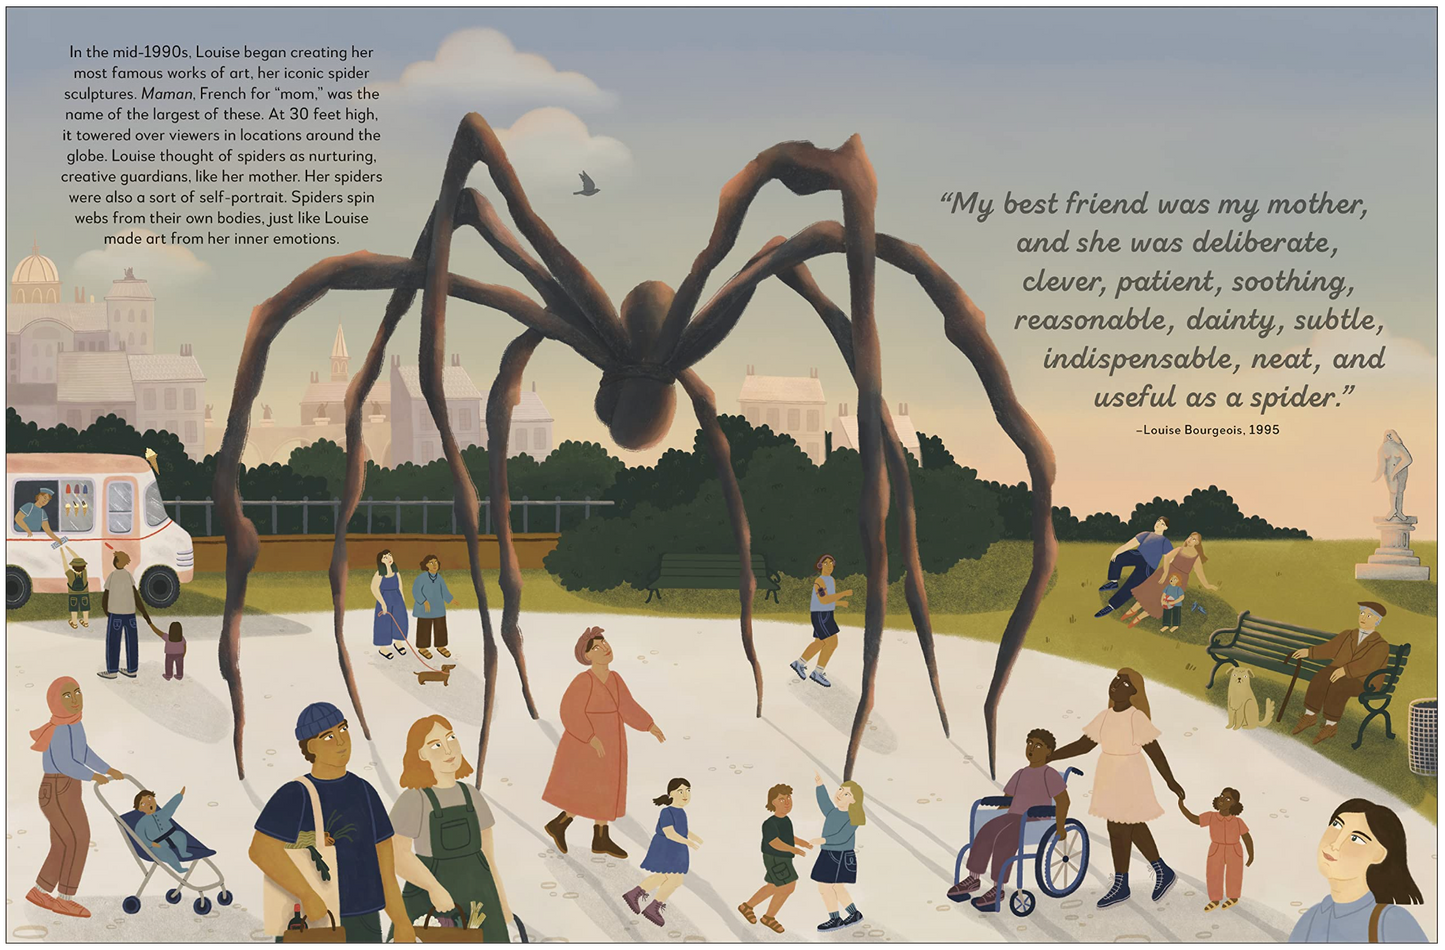 Inside page from ‘Louise Bourgeois: She Saw the World as a Textured Tapestry’ featuring a community and a giant spider. 